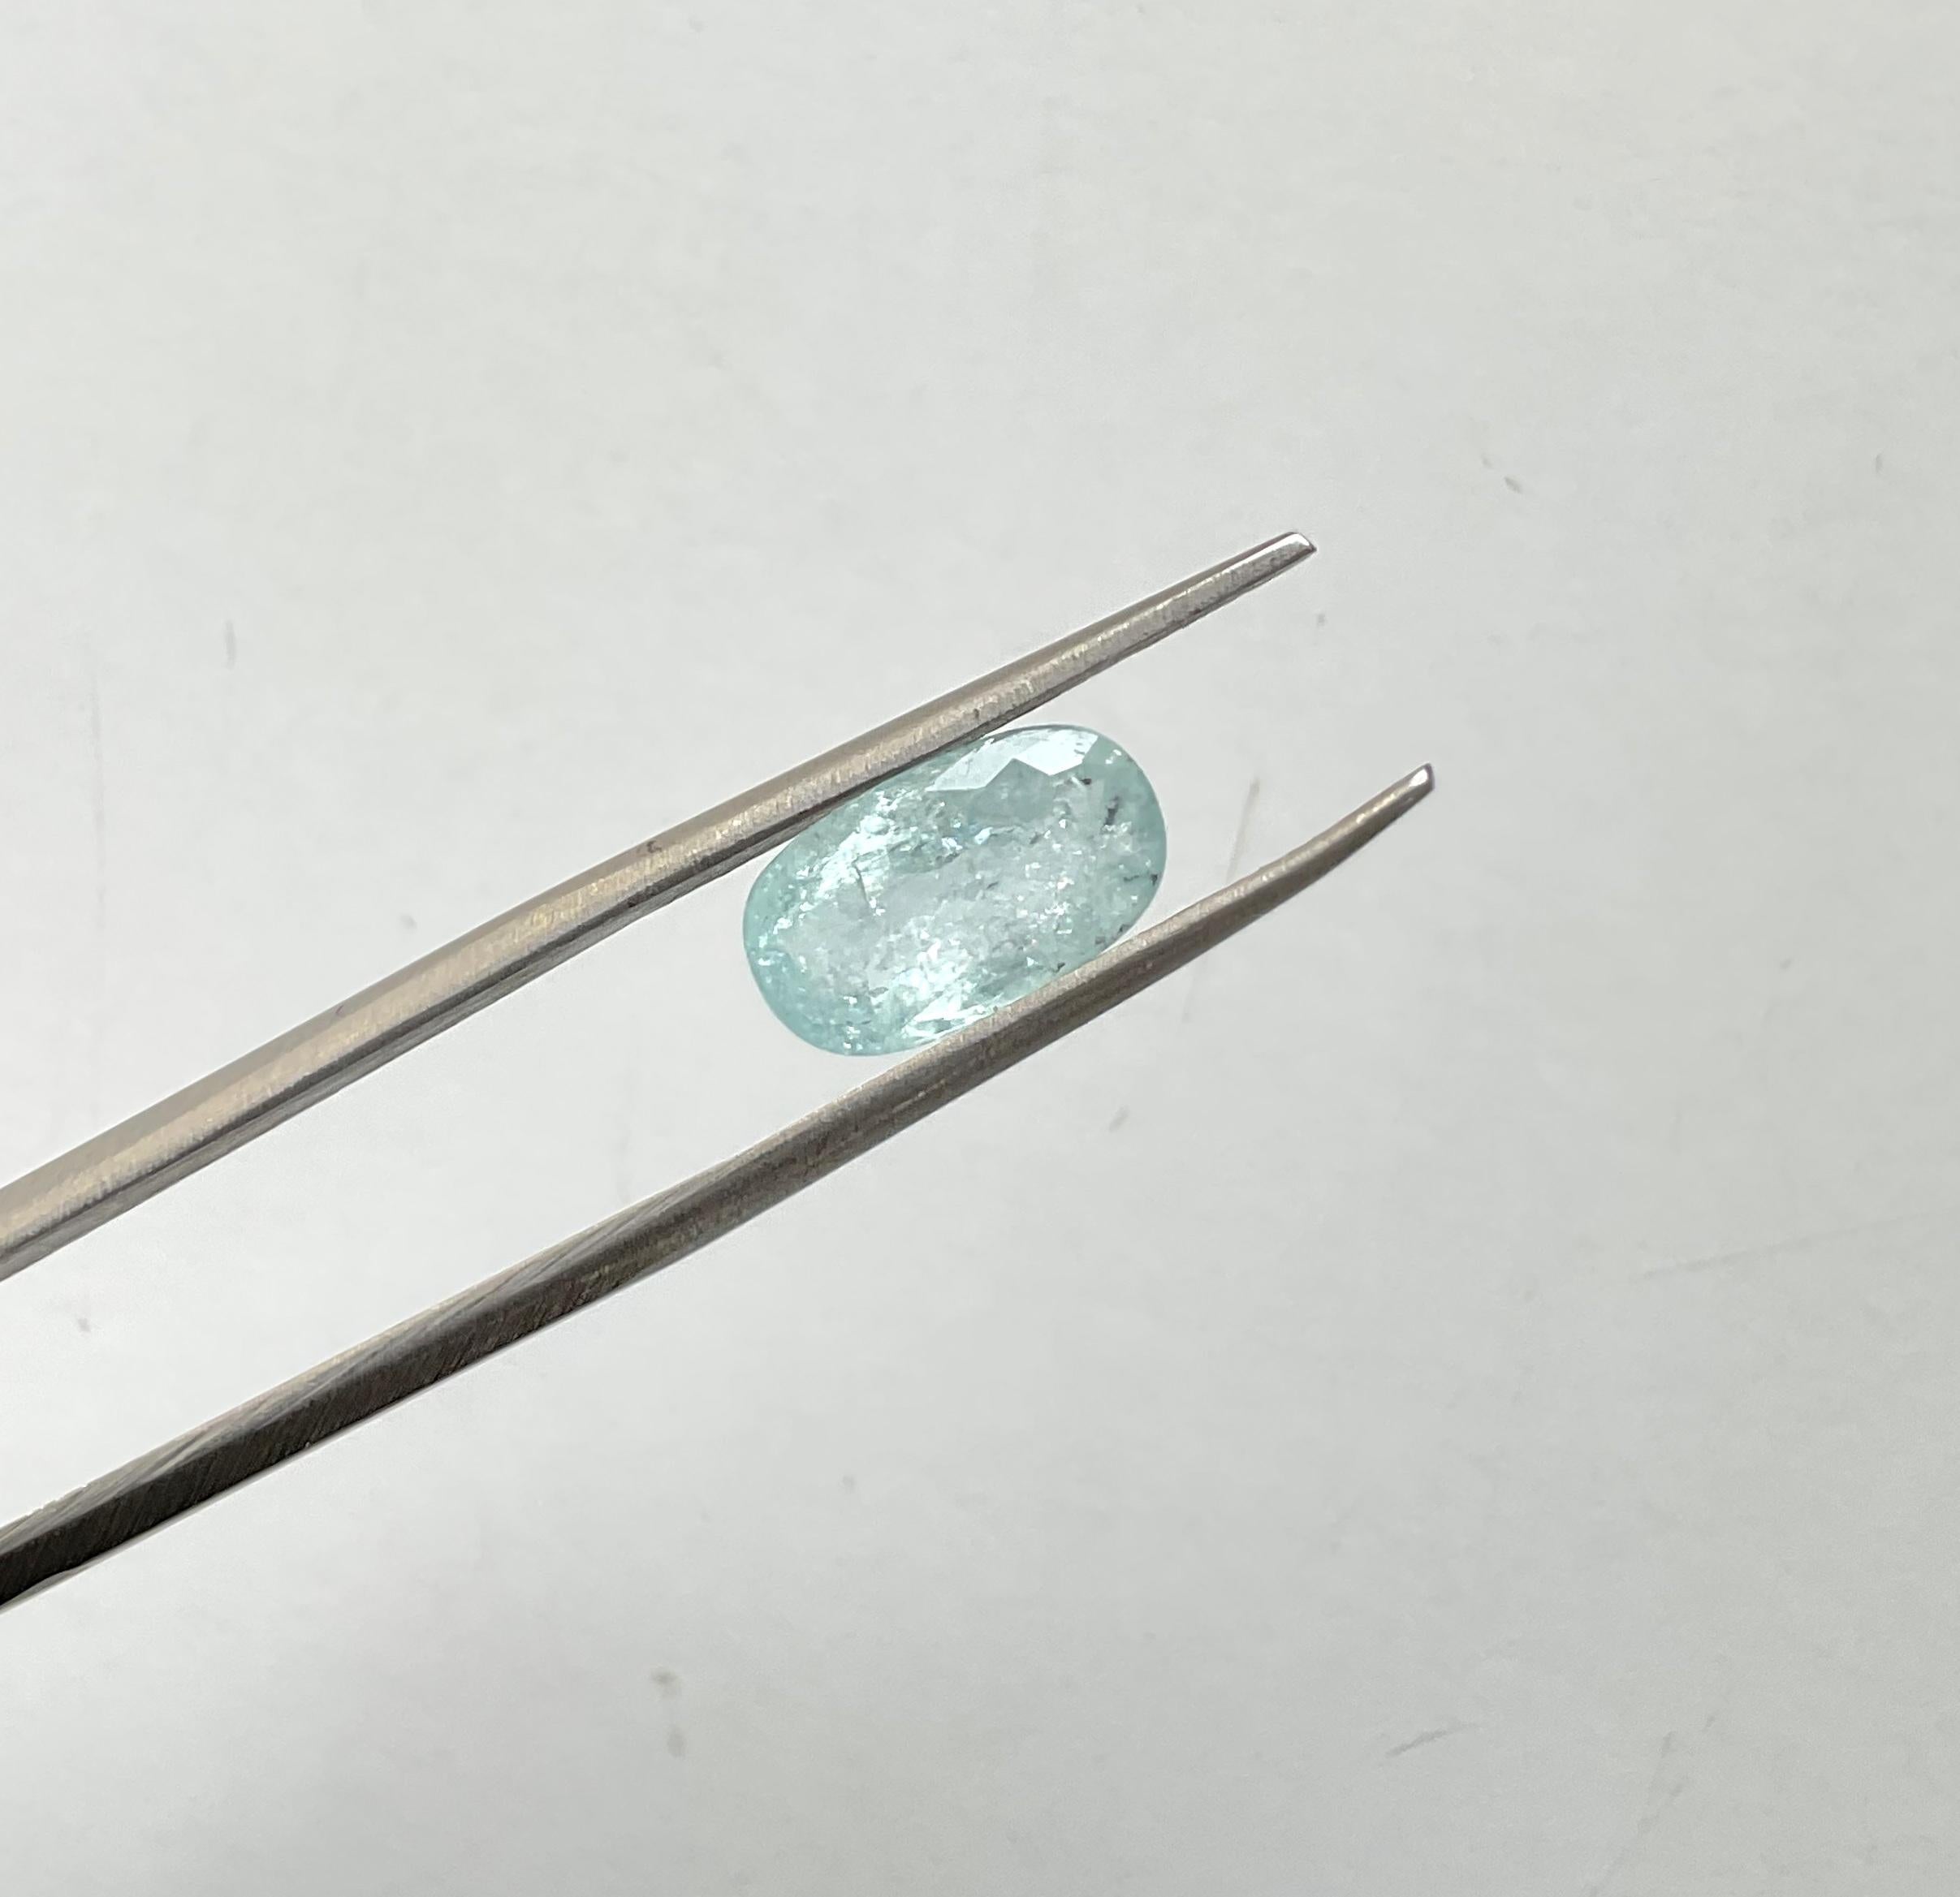 2.19 Carats Paraiba Tourmaline Oval Cut Stone for Fine Jewelry Natural gemstone For Sale 2